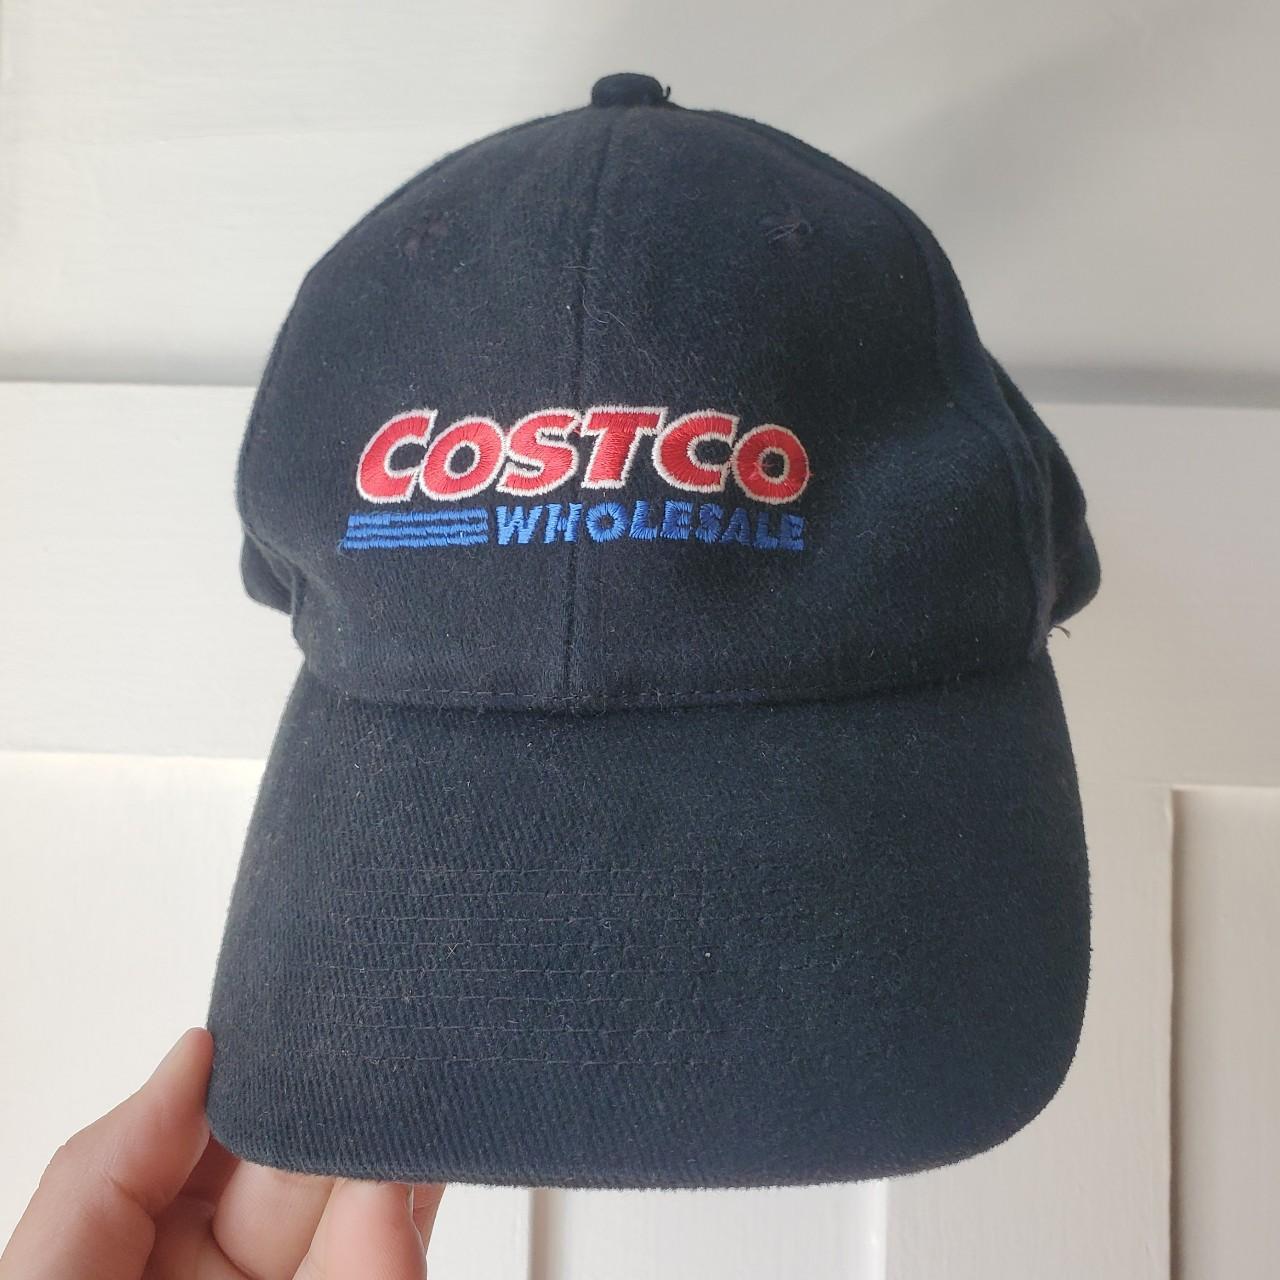 Costco Men's Black and Red Hat